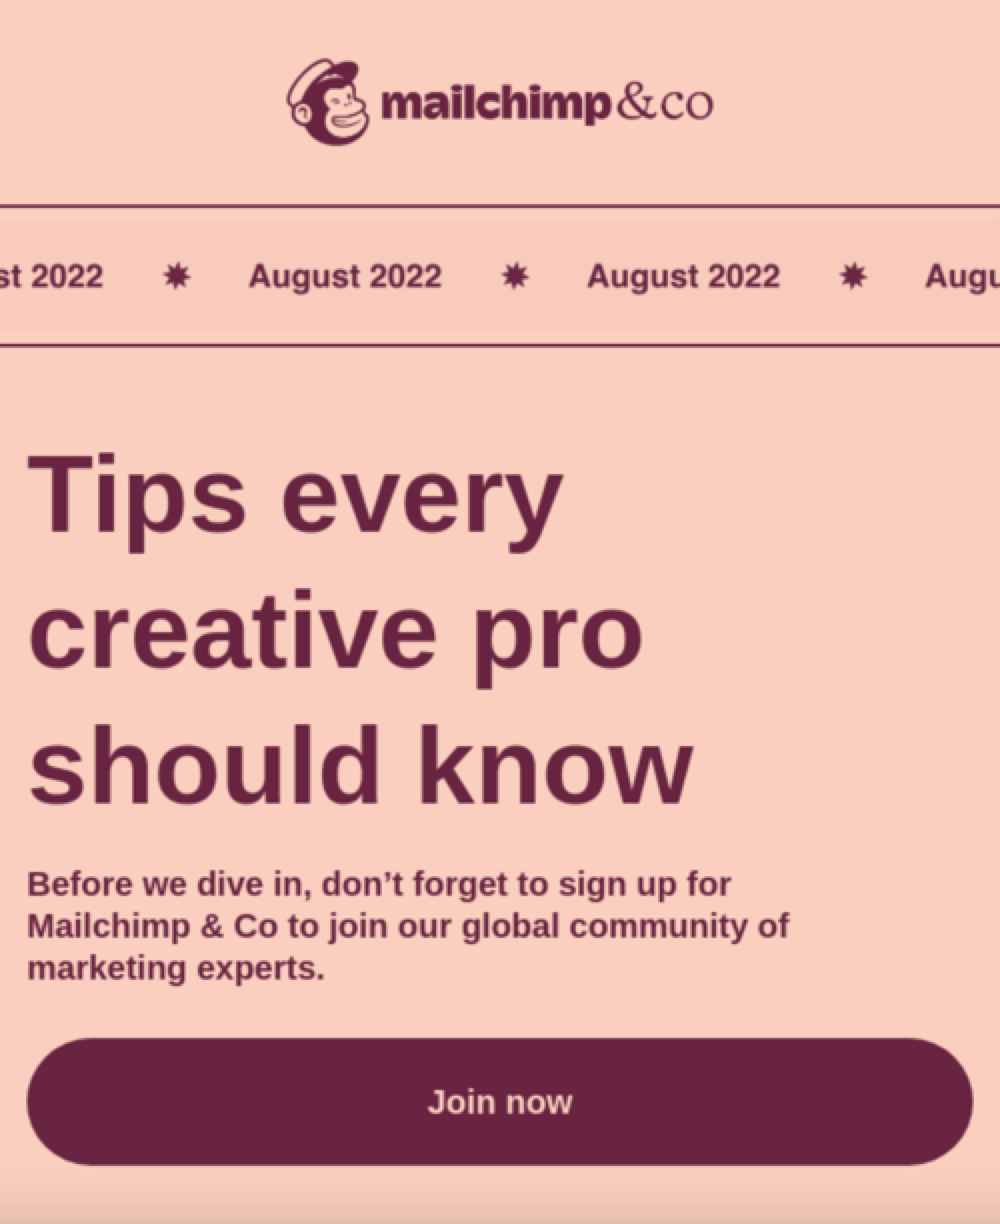 mailchimp curated content email